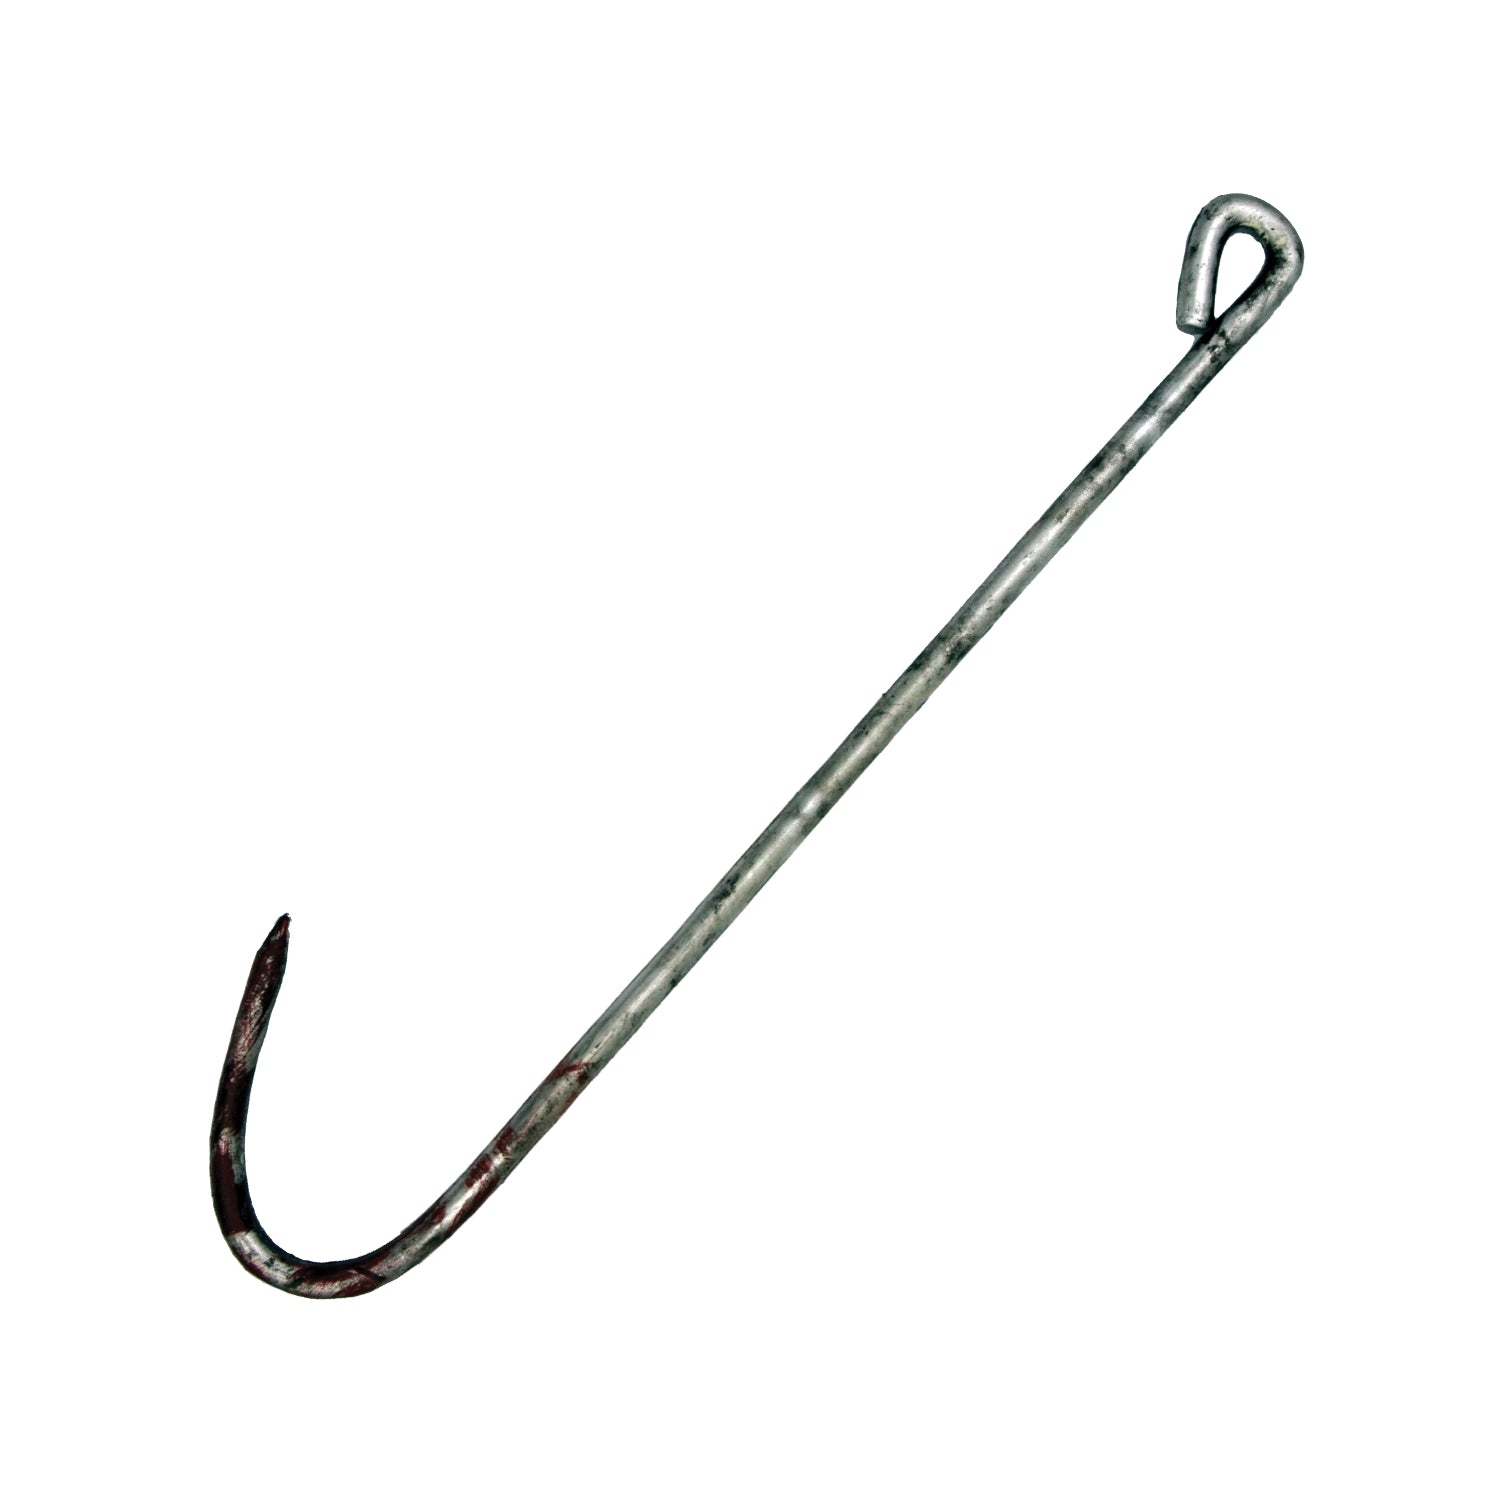 The Texas Chainsaw Massacre (1974) - Meat Hook Prop